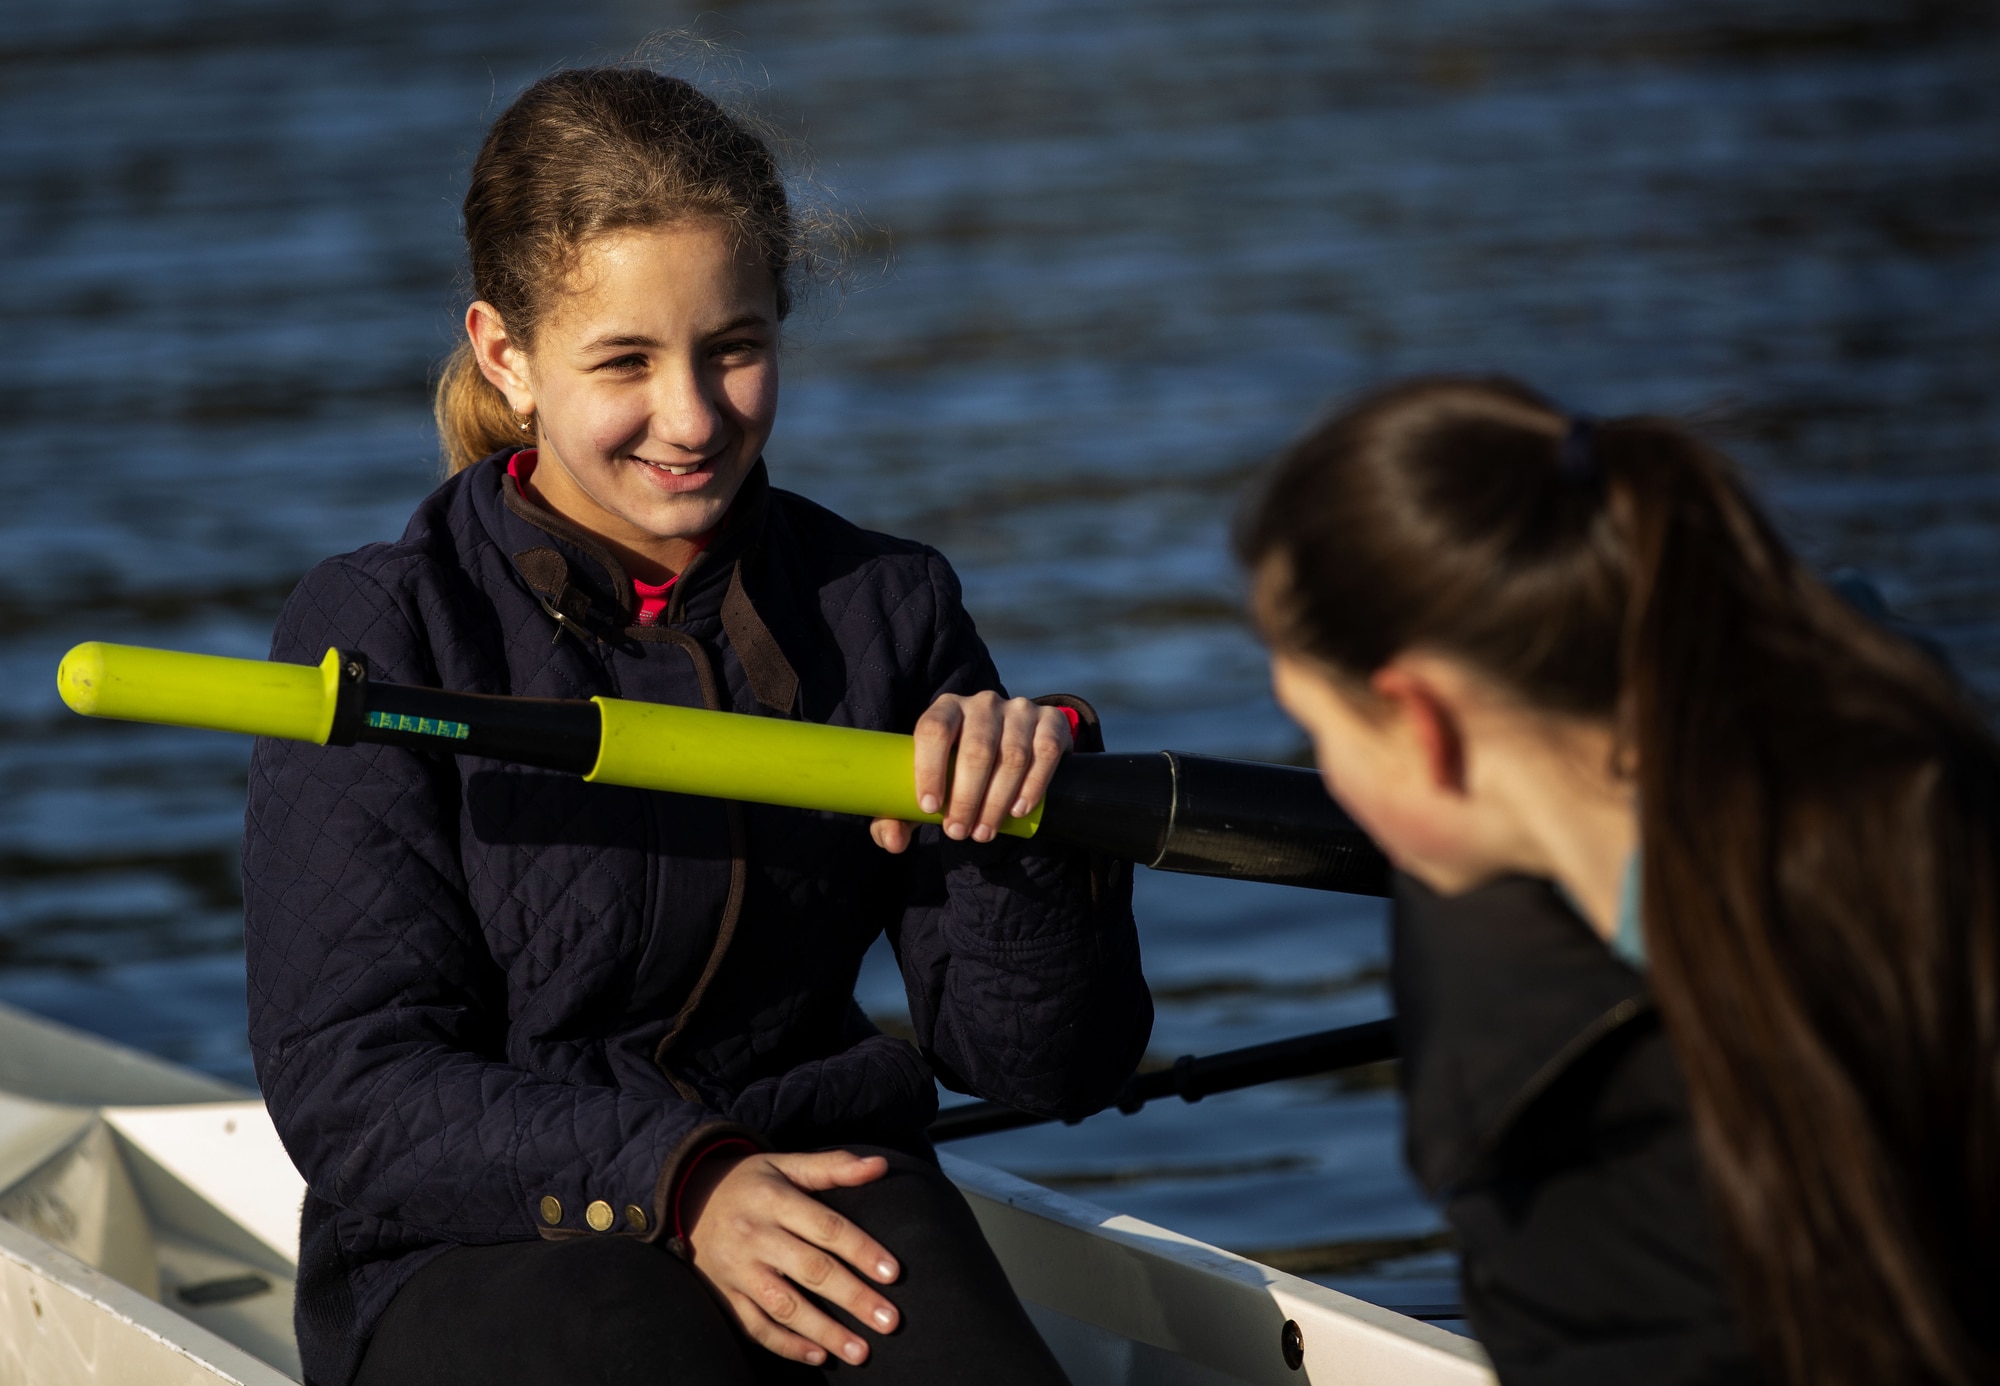 Learn-to-Row Program for Displaced Ukrainian Youth